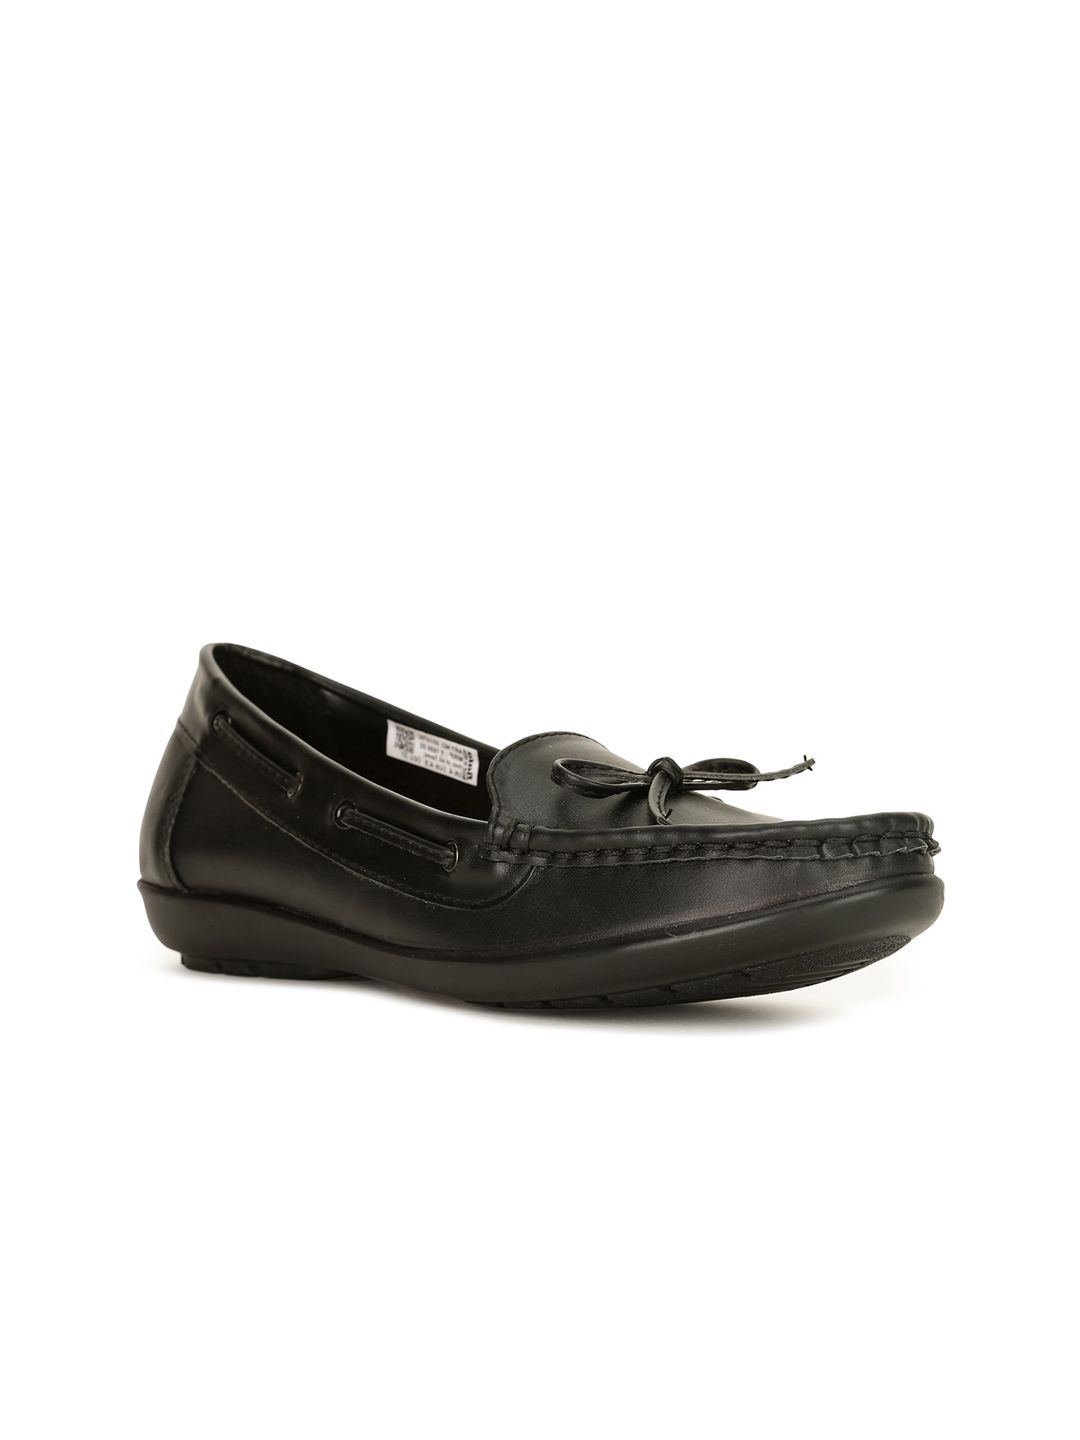 Bata Women Black Loafers Price in India